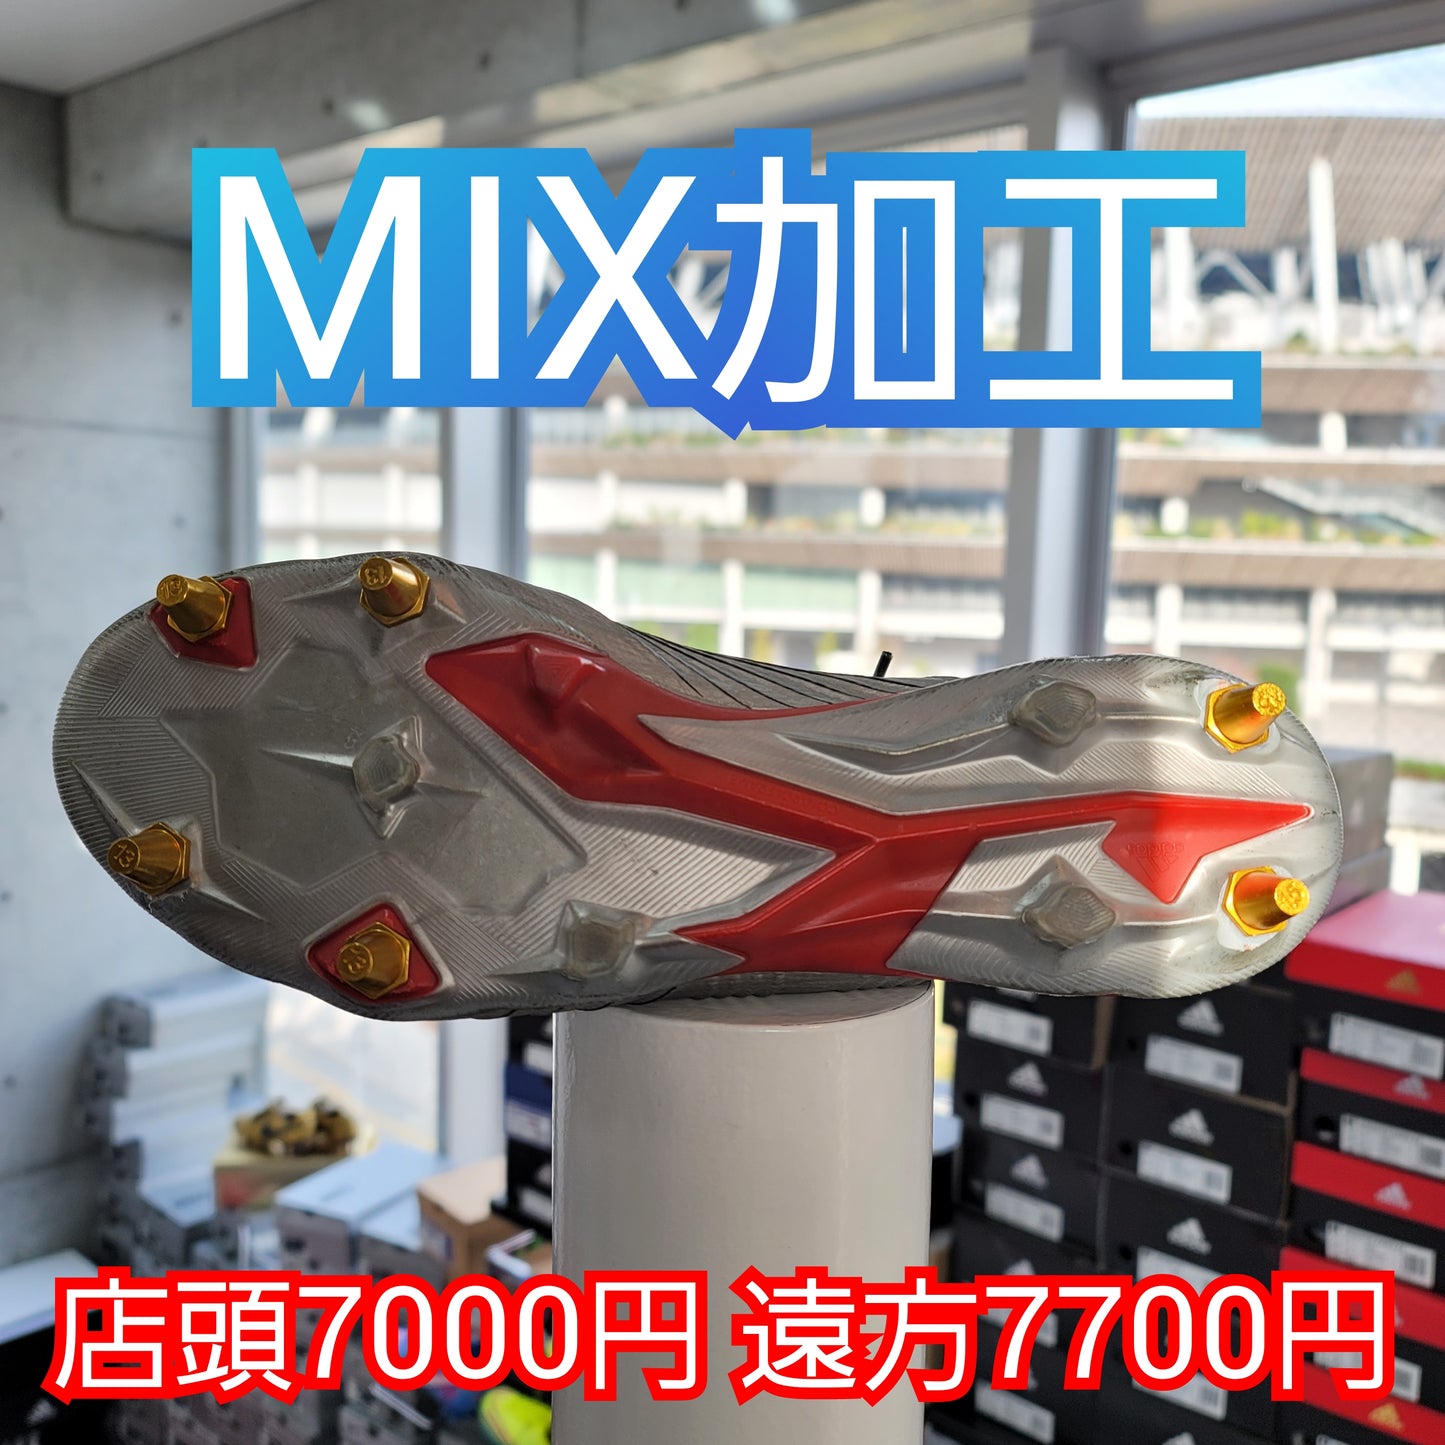 Mix processing (with wrench stud 2,750 yen) Delivery time 6 business days My right arm